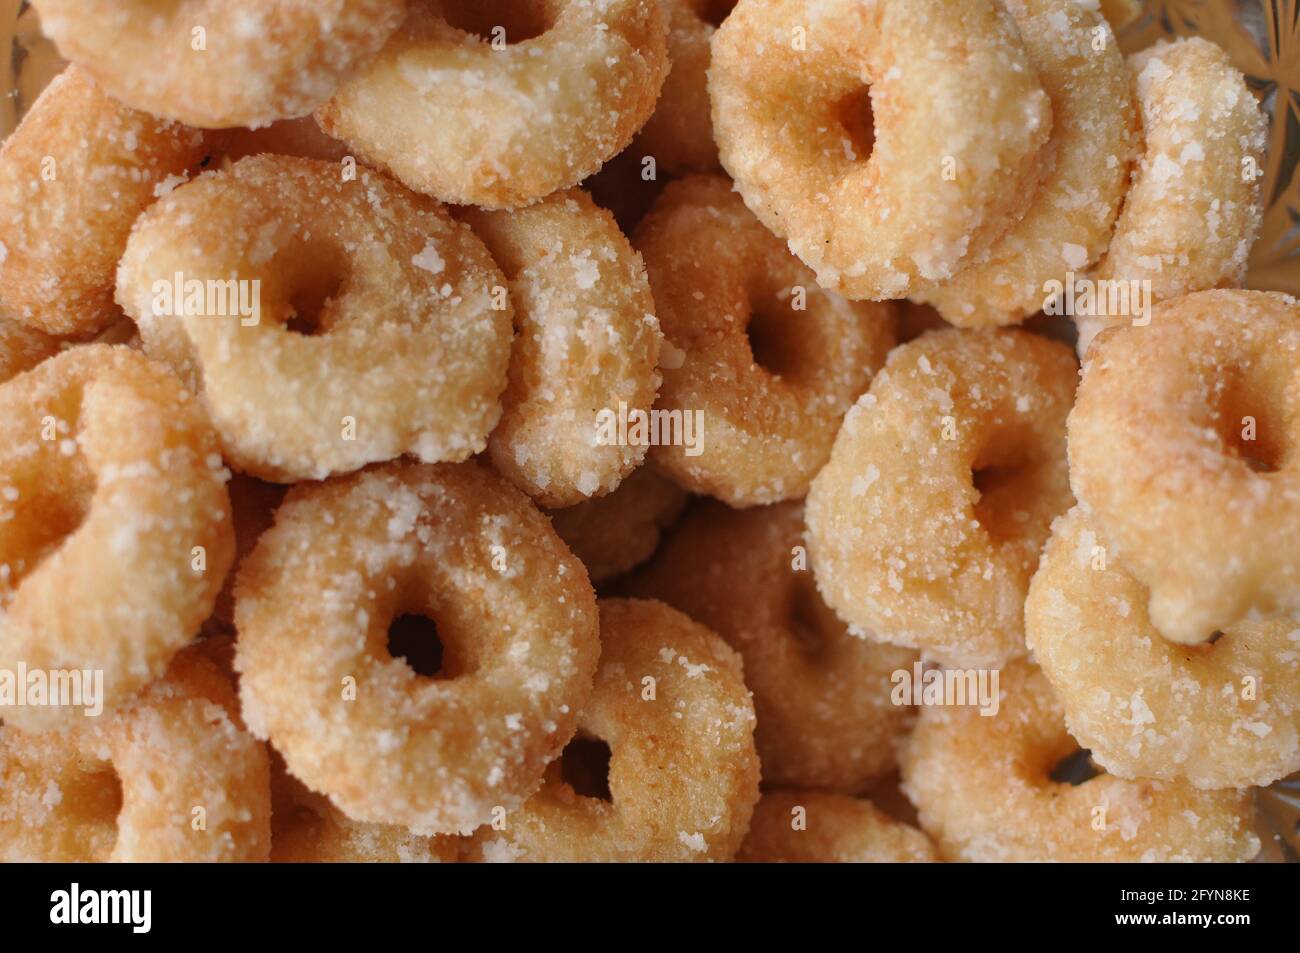 Sweet delicious food background Stock Photo